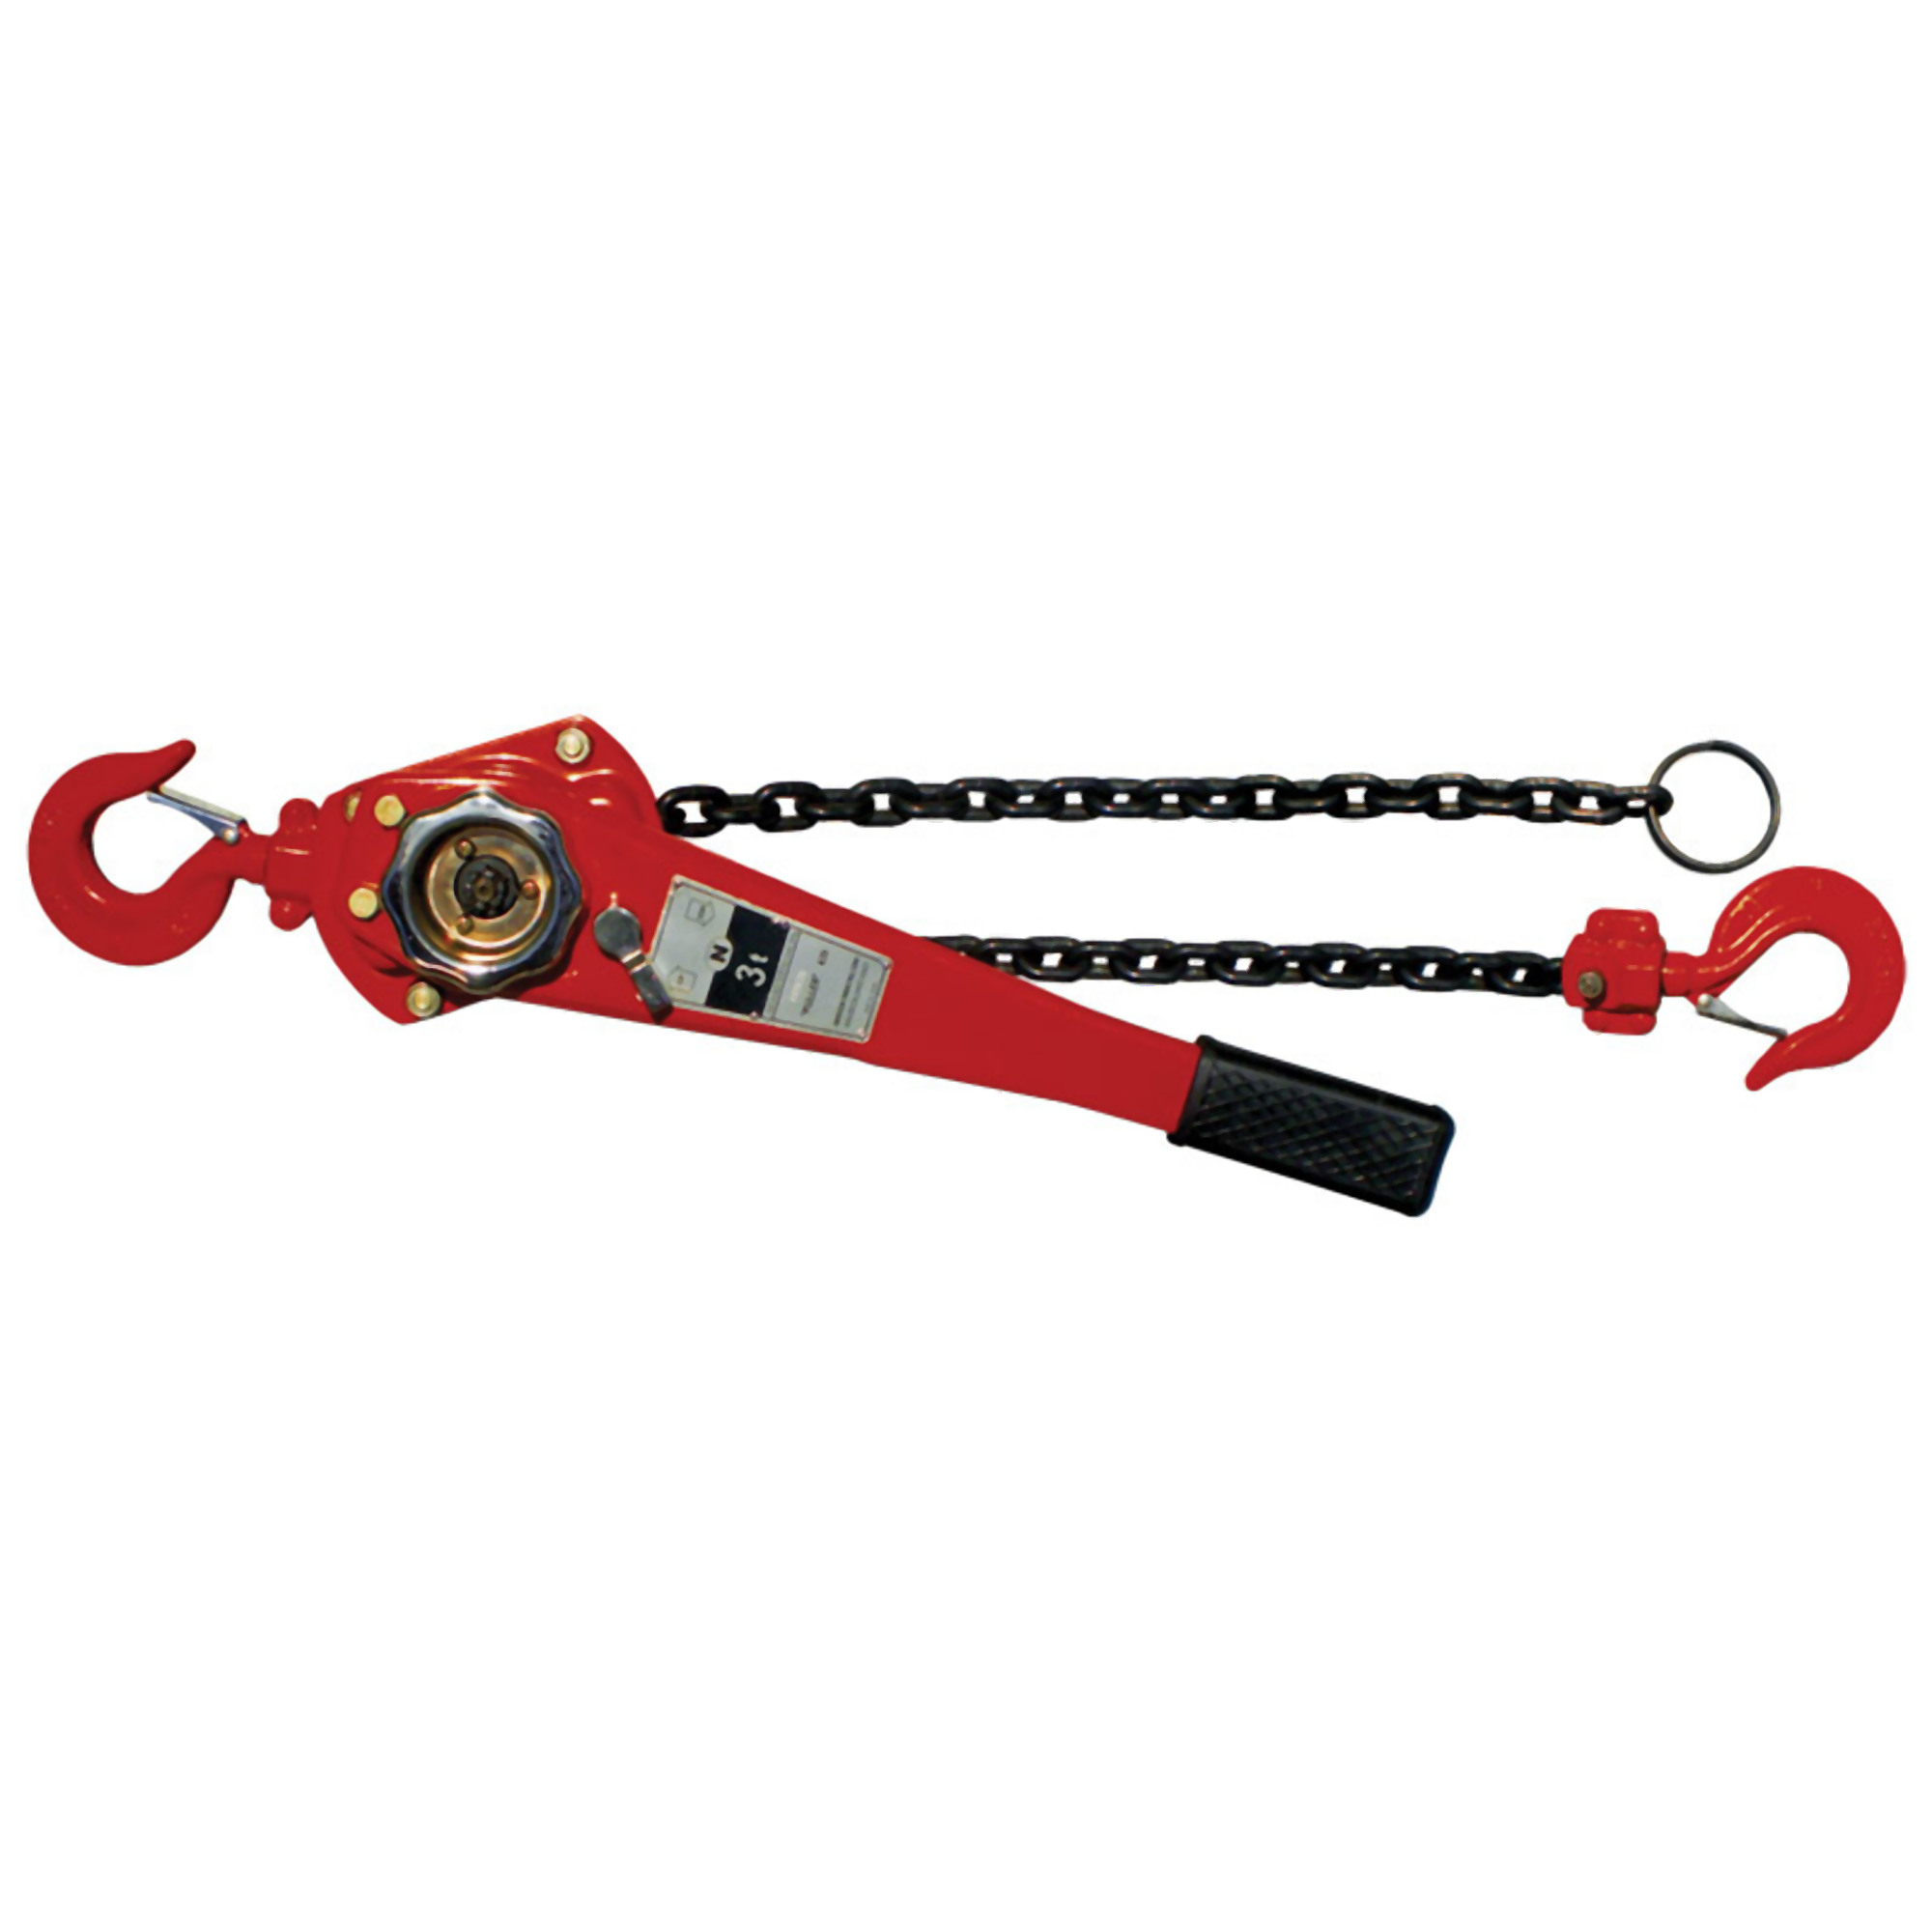 American Power Pull, 3 ton chain puller, Power Source Manual Lever, Capacity 6000 lb, Lift Height 5 ft, Model 635